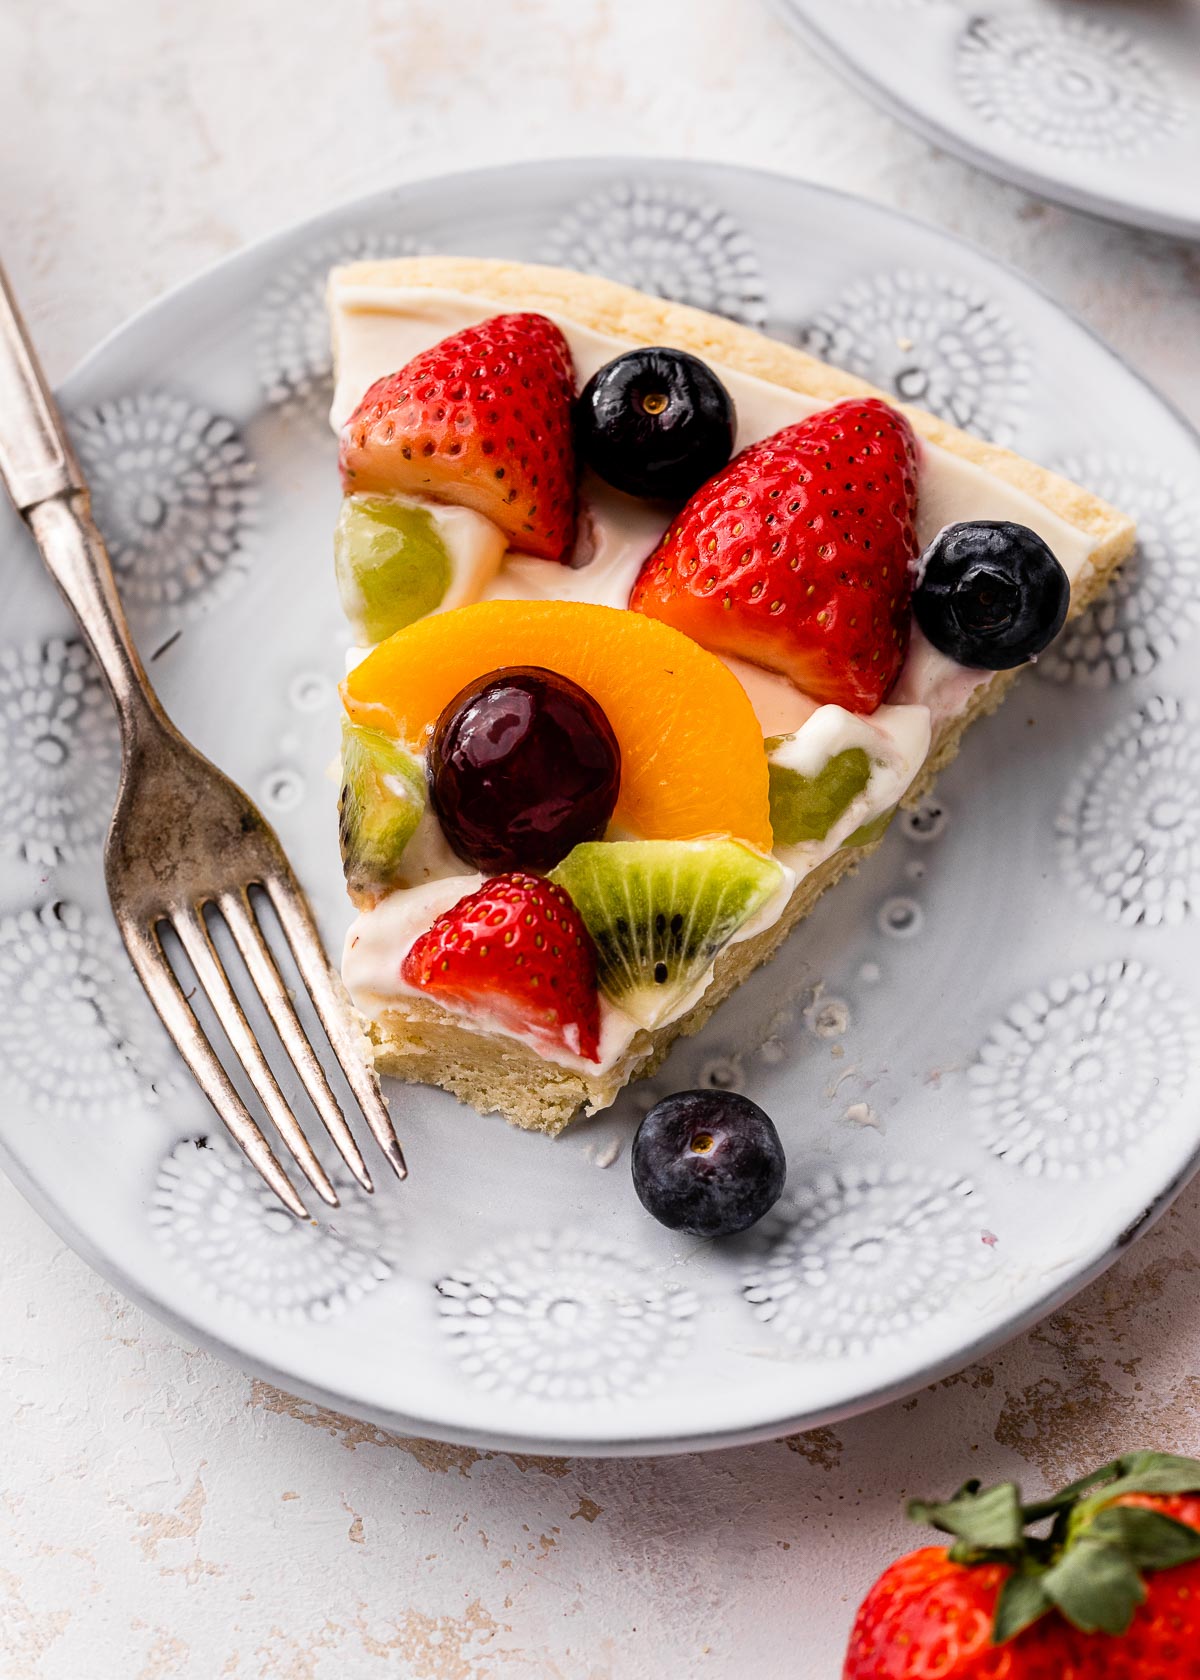 Top view of a slice of fruit pizza on a white plate with a fork on the side.